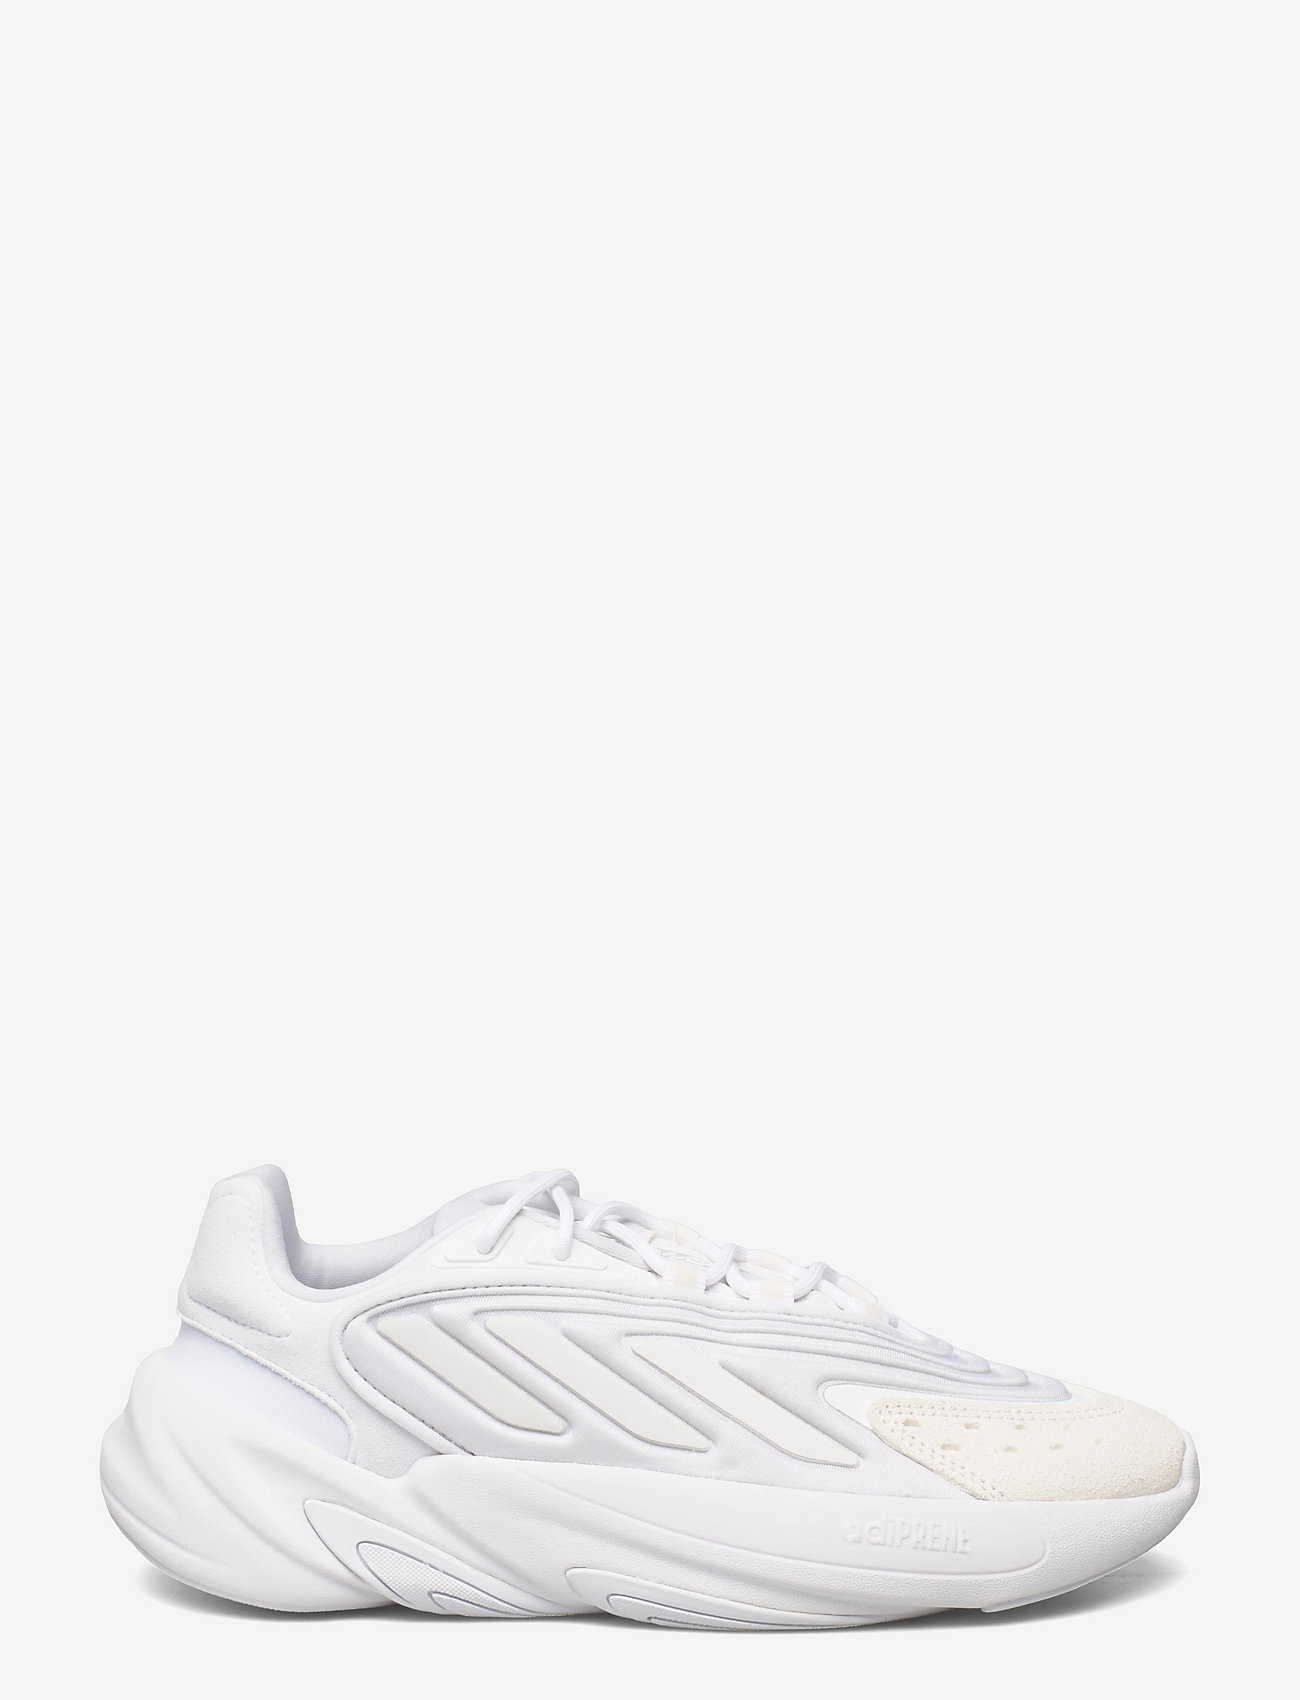 adidas Originals - Ozelia Shoes - chunky sneakers - ftwwht/ftwwht/crywht - 1